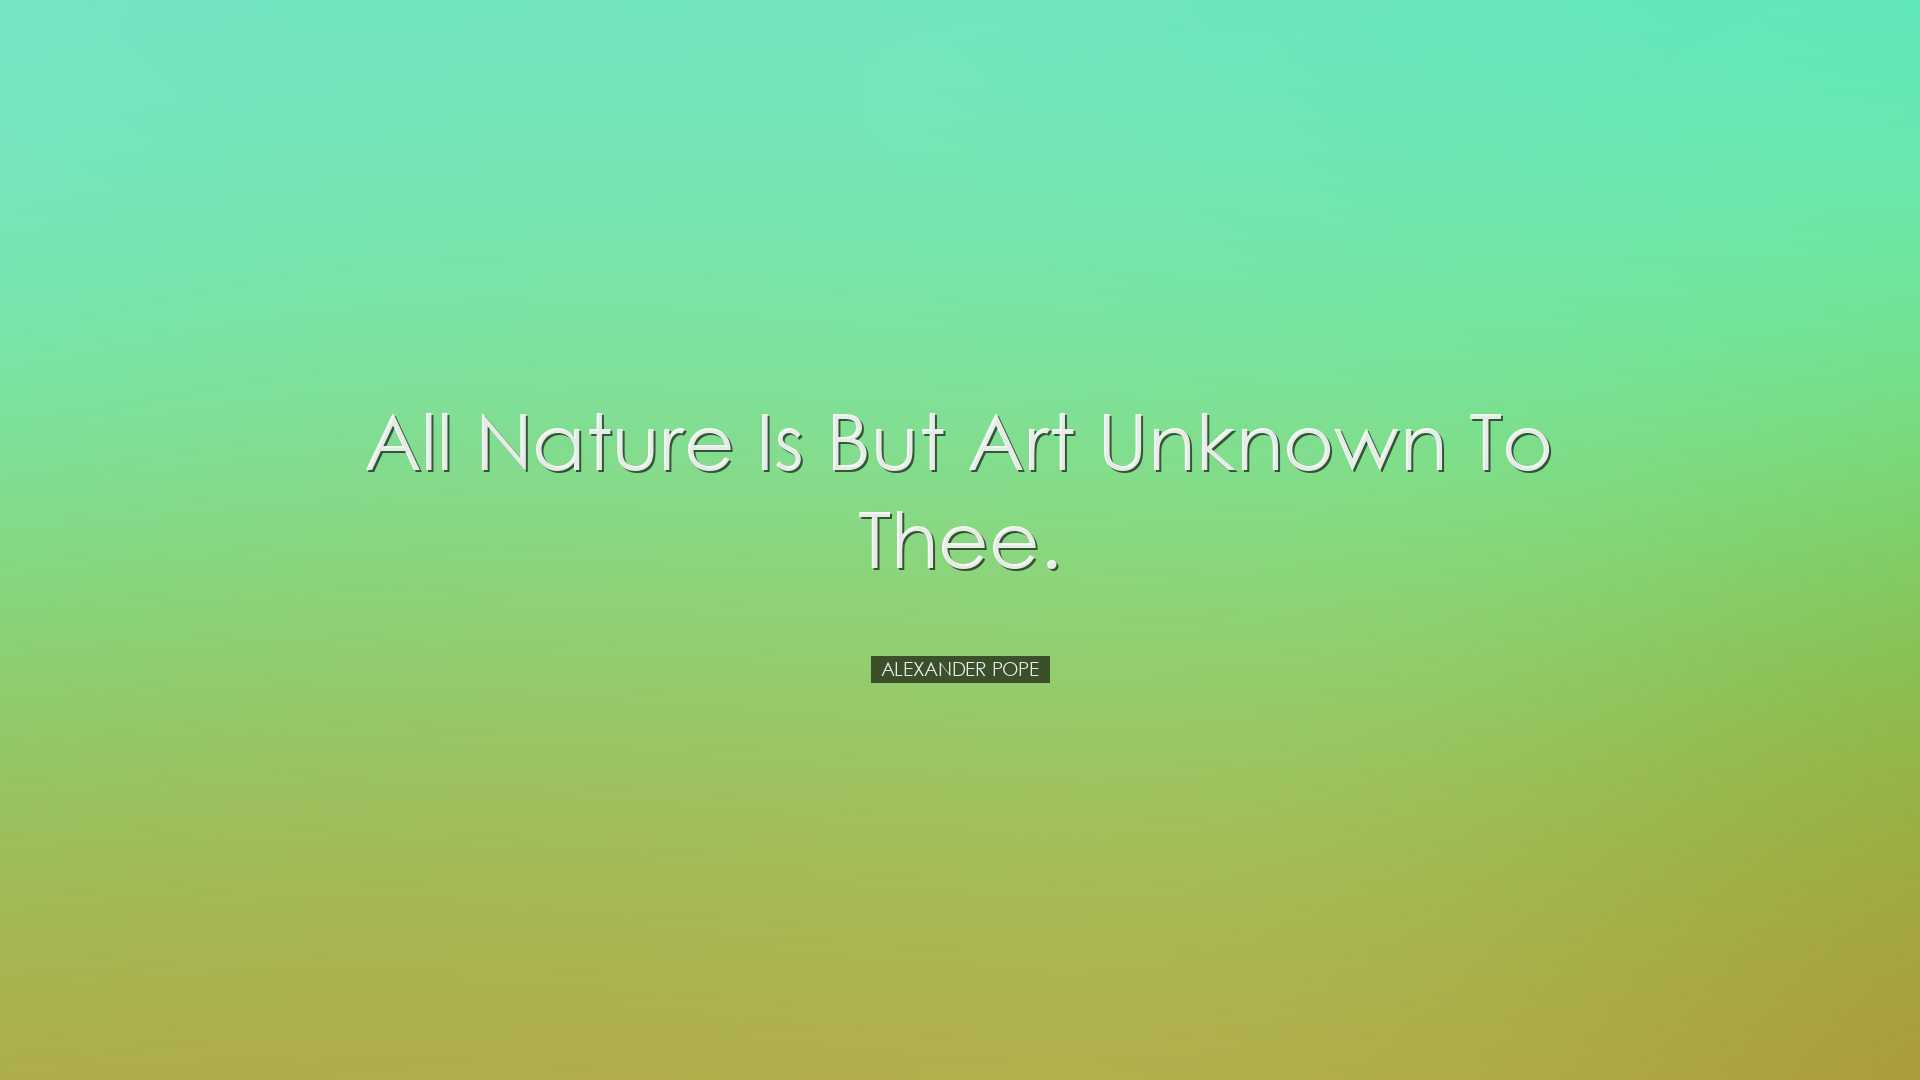 All nature is but art unknown to thee. - Alexander Pope